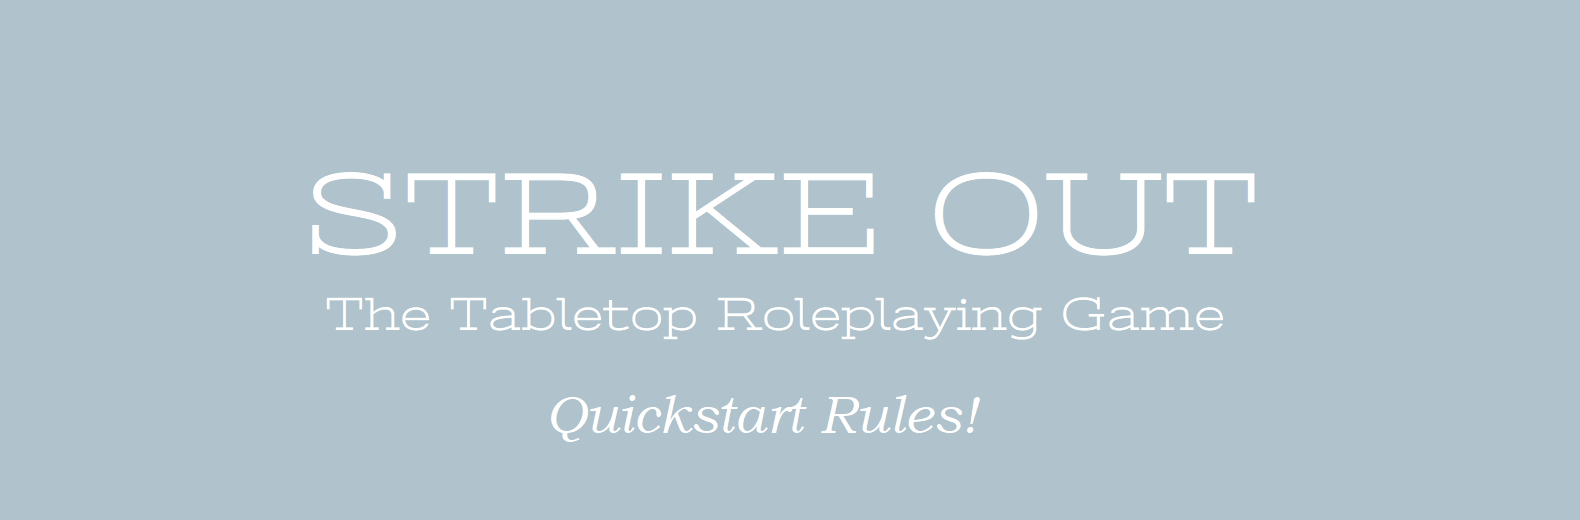 Strike Out - Quickstart Rules